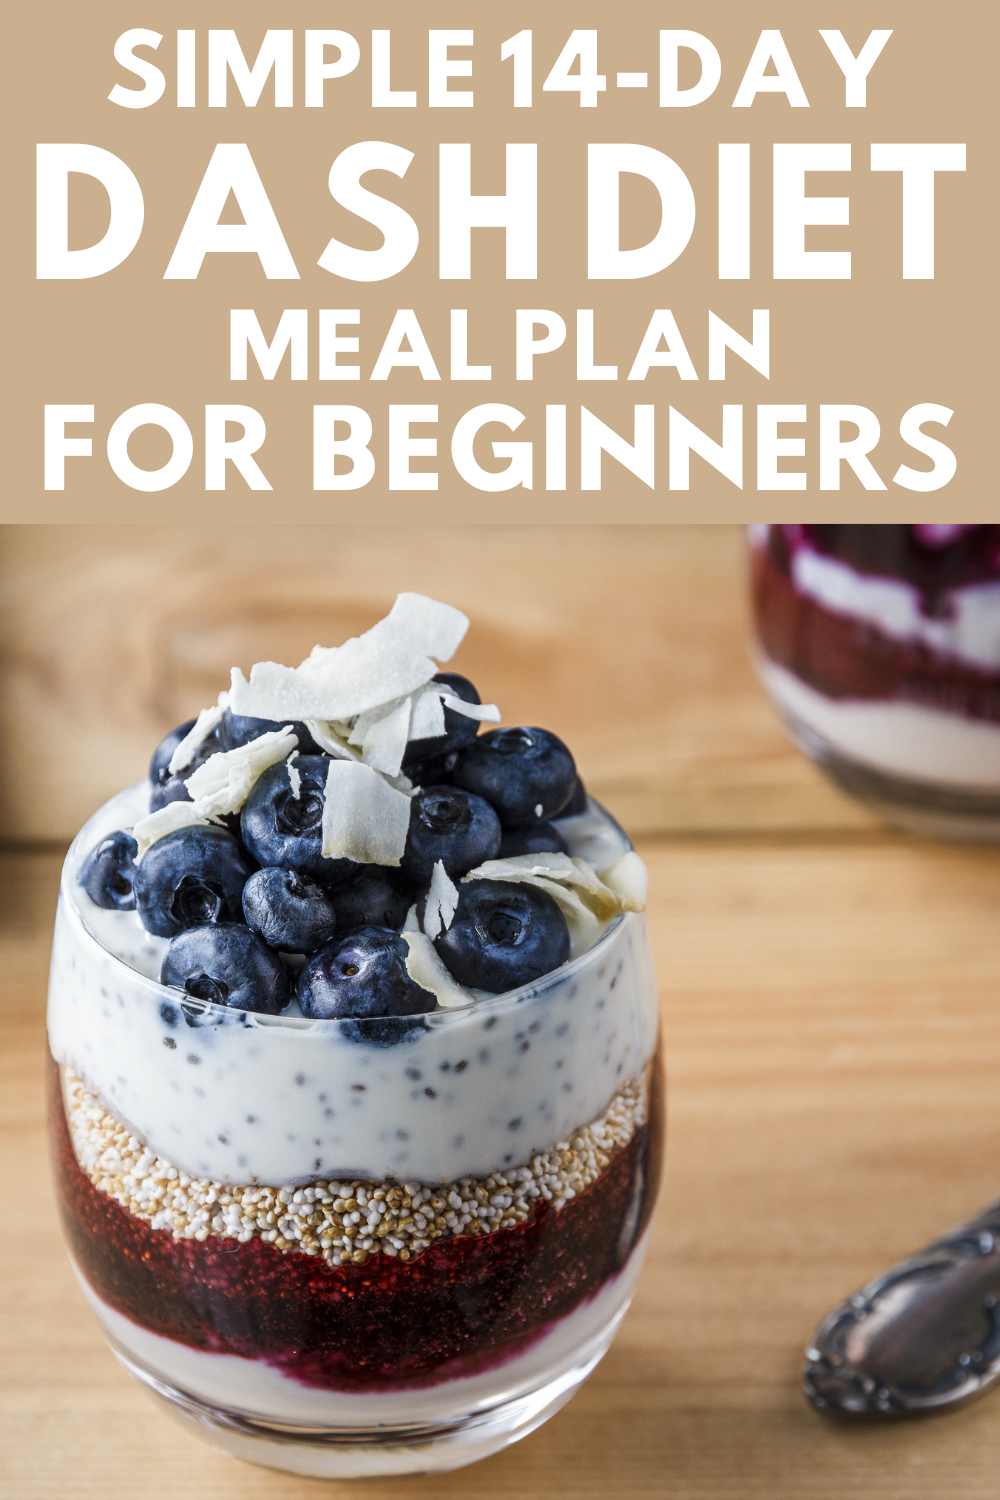 SIMPLE 14-DAY DASH DIET MEAL PLAN FOR BEGINNERS